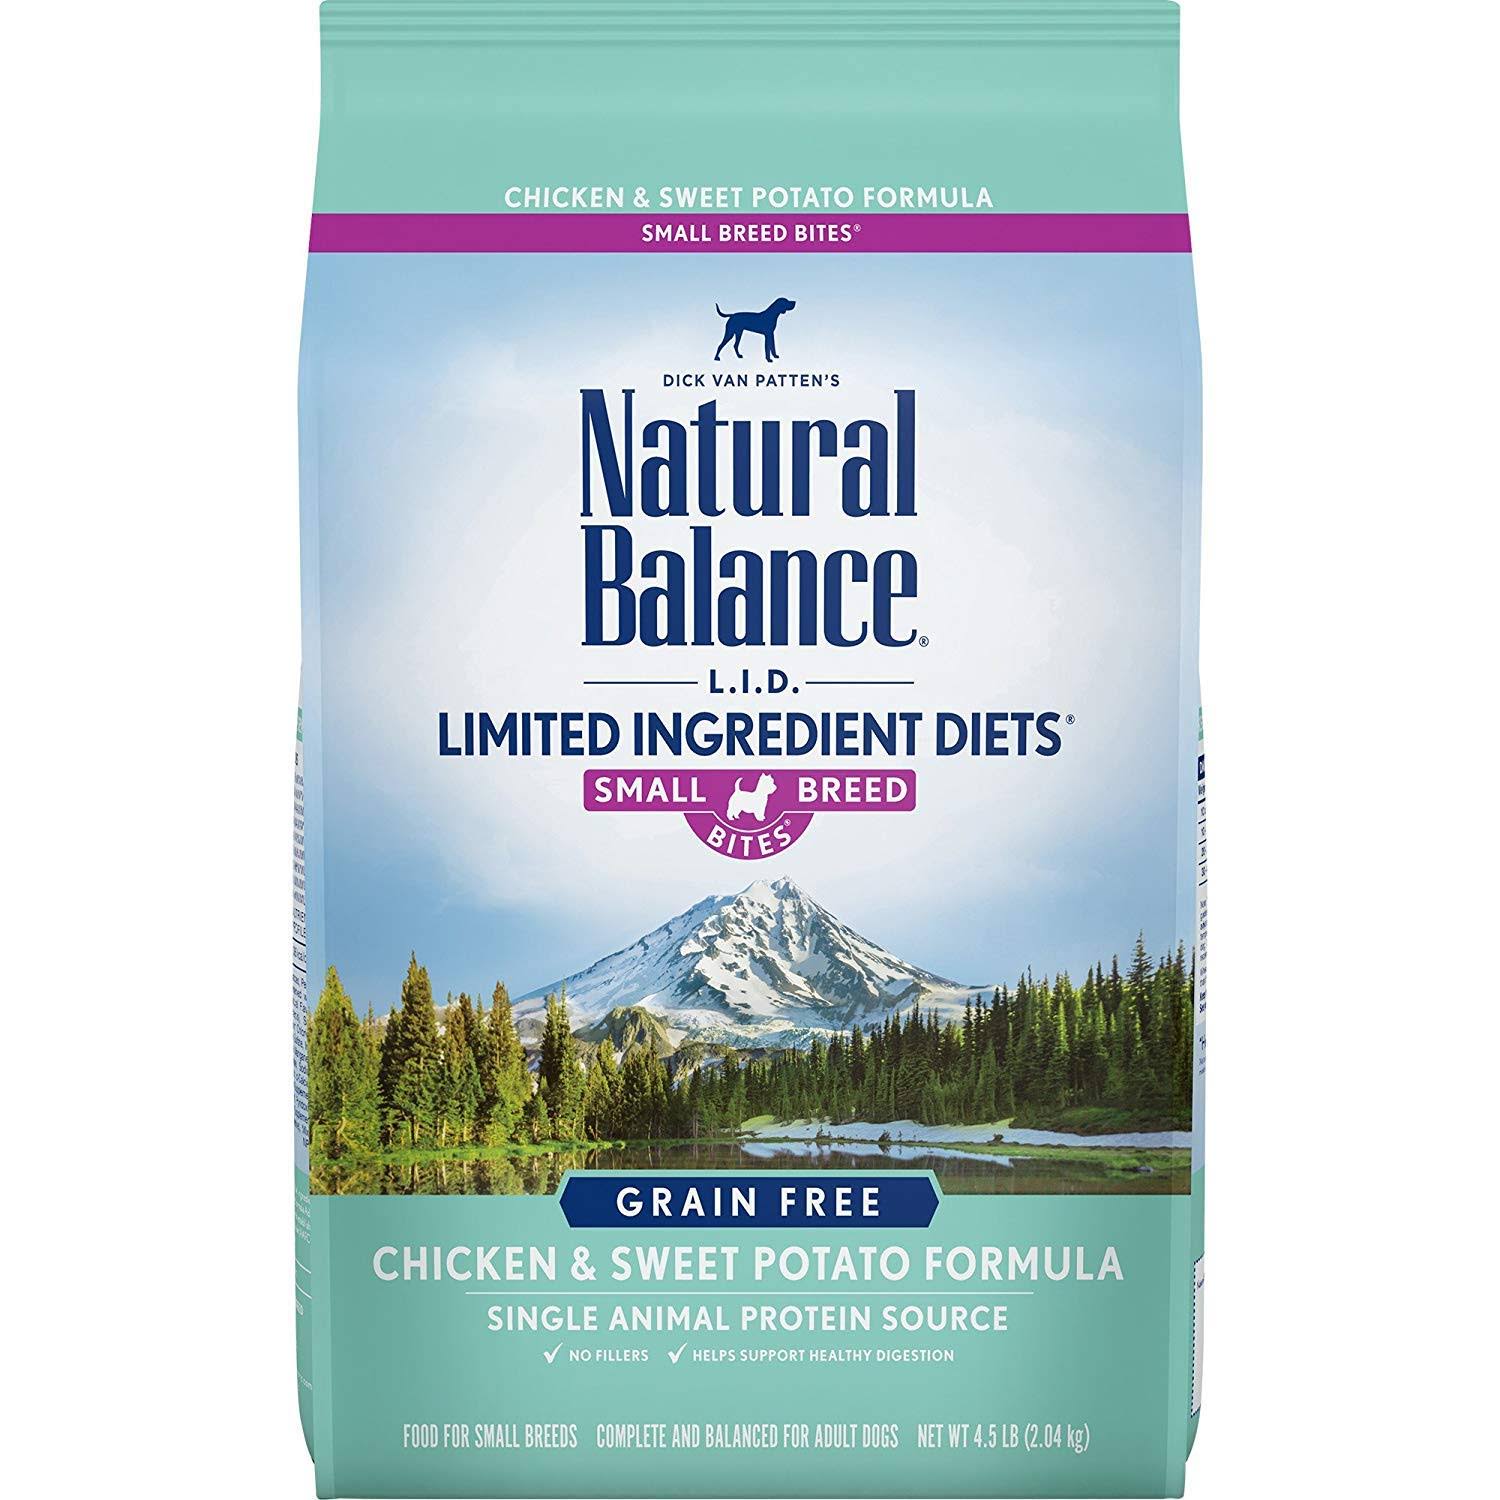 Natural Balance Small Breed Bites L.I.D. Limited Ingredient Diets Dry Dog Food, Grain Free, Chicken & Sweet Potato Formula, 4.5-Pound